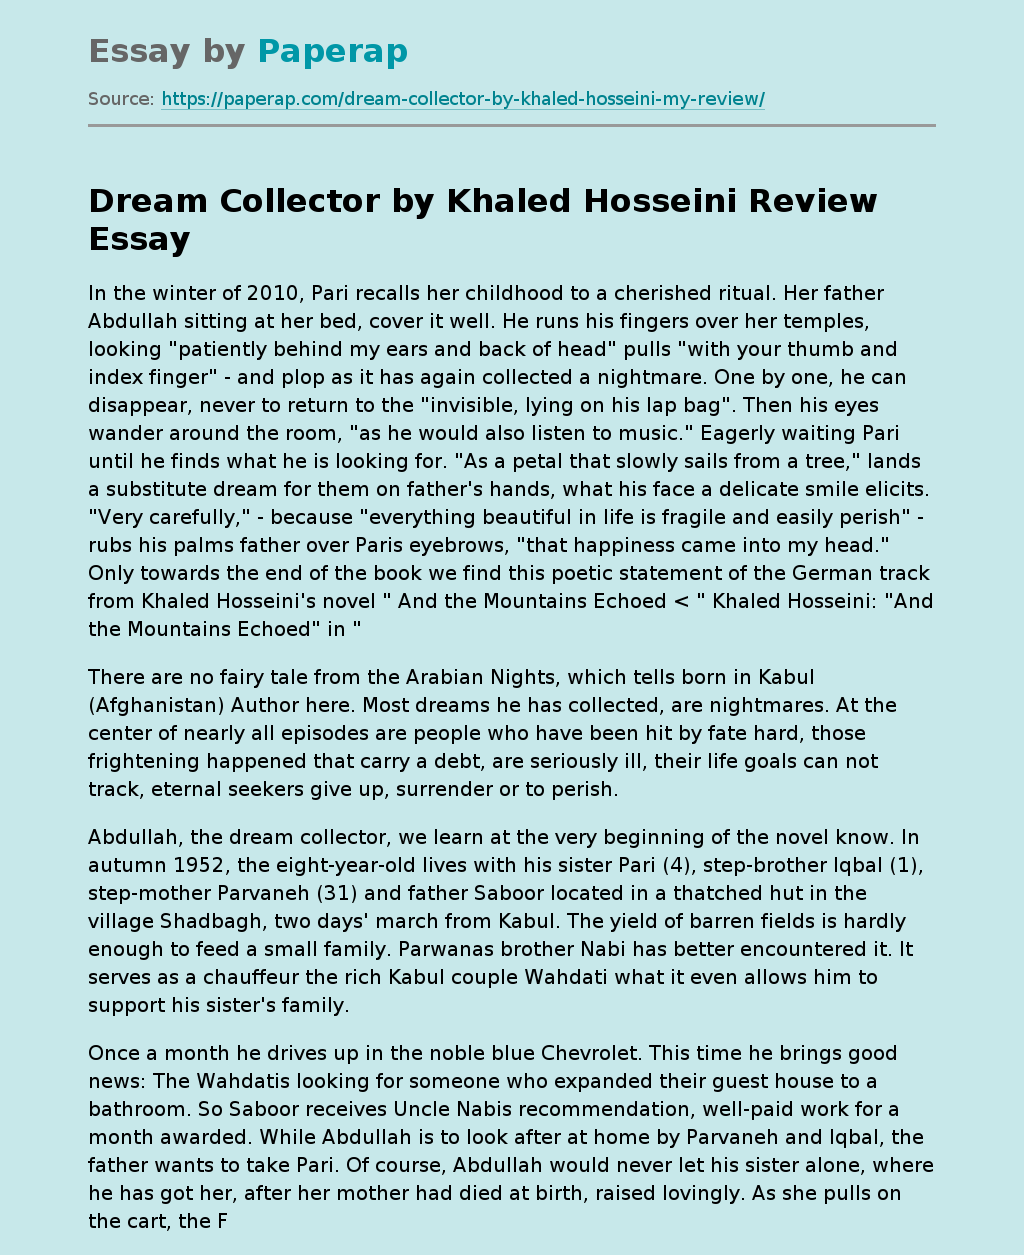 Dream Collector by Khaled Hosseini Review